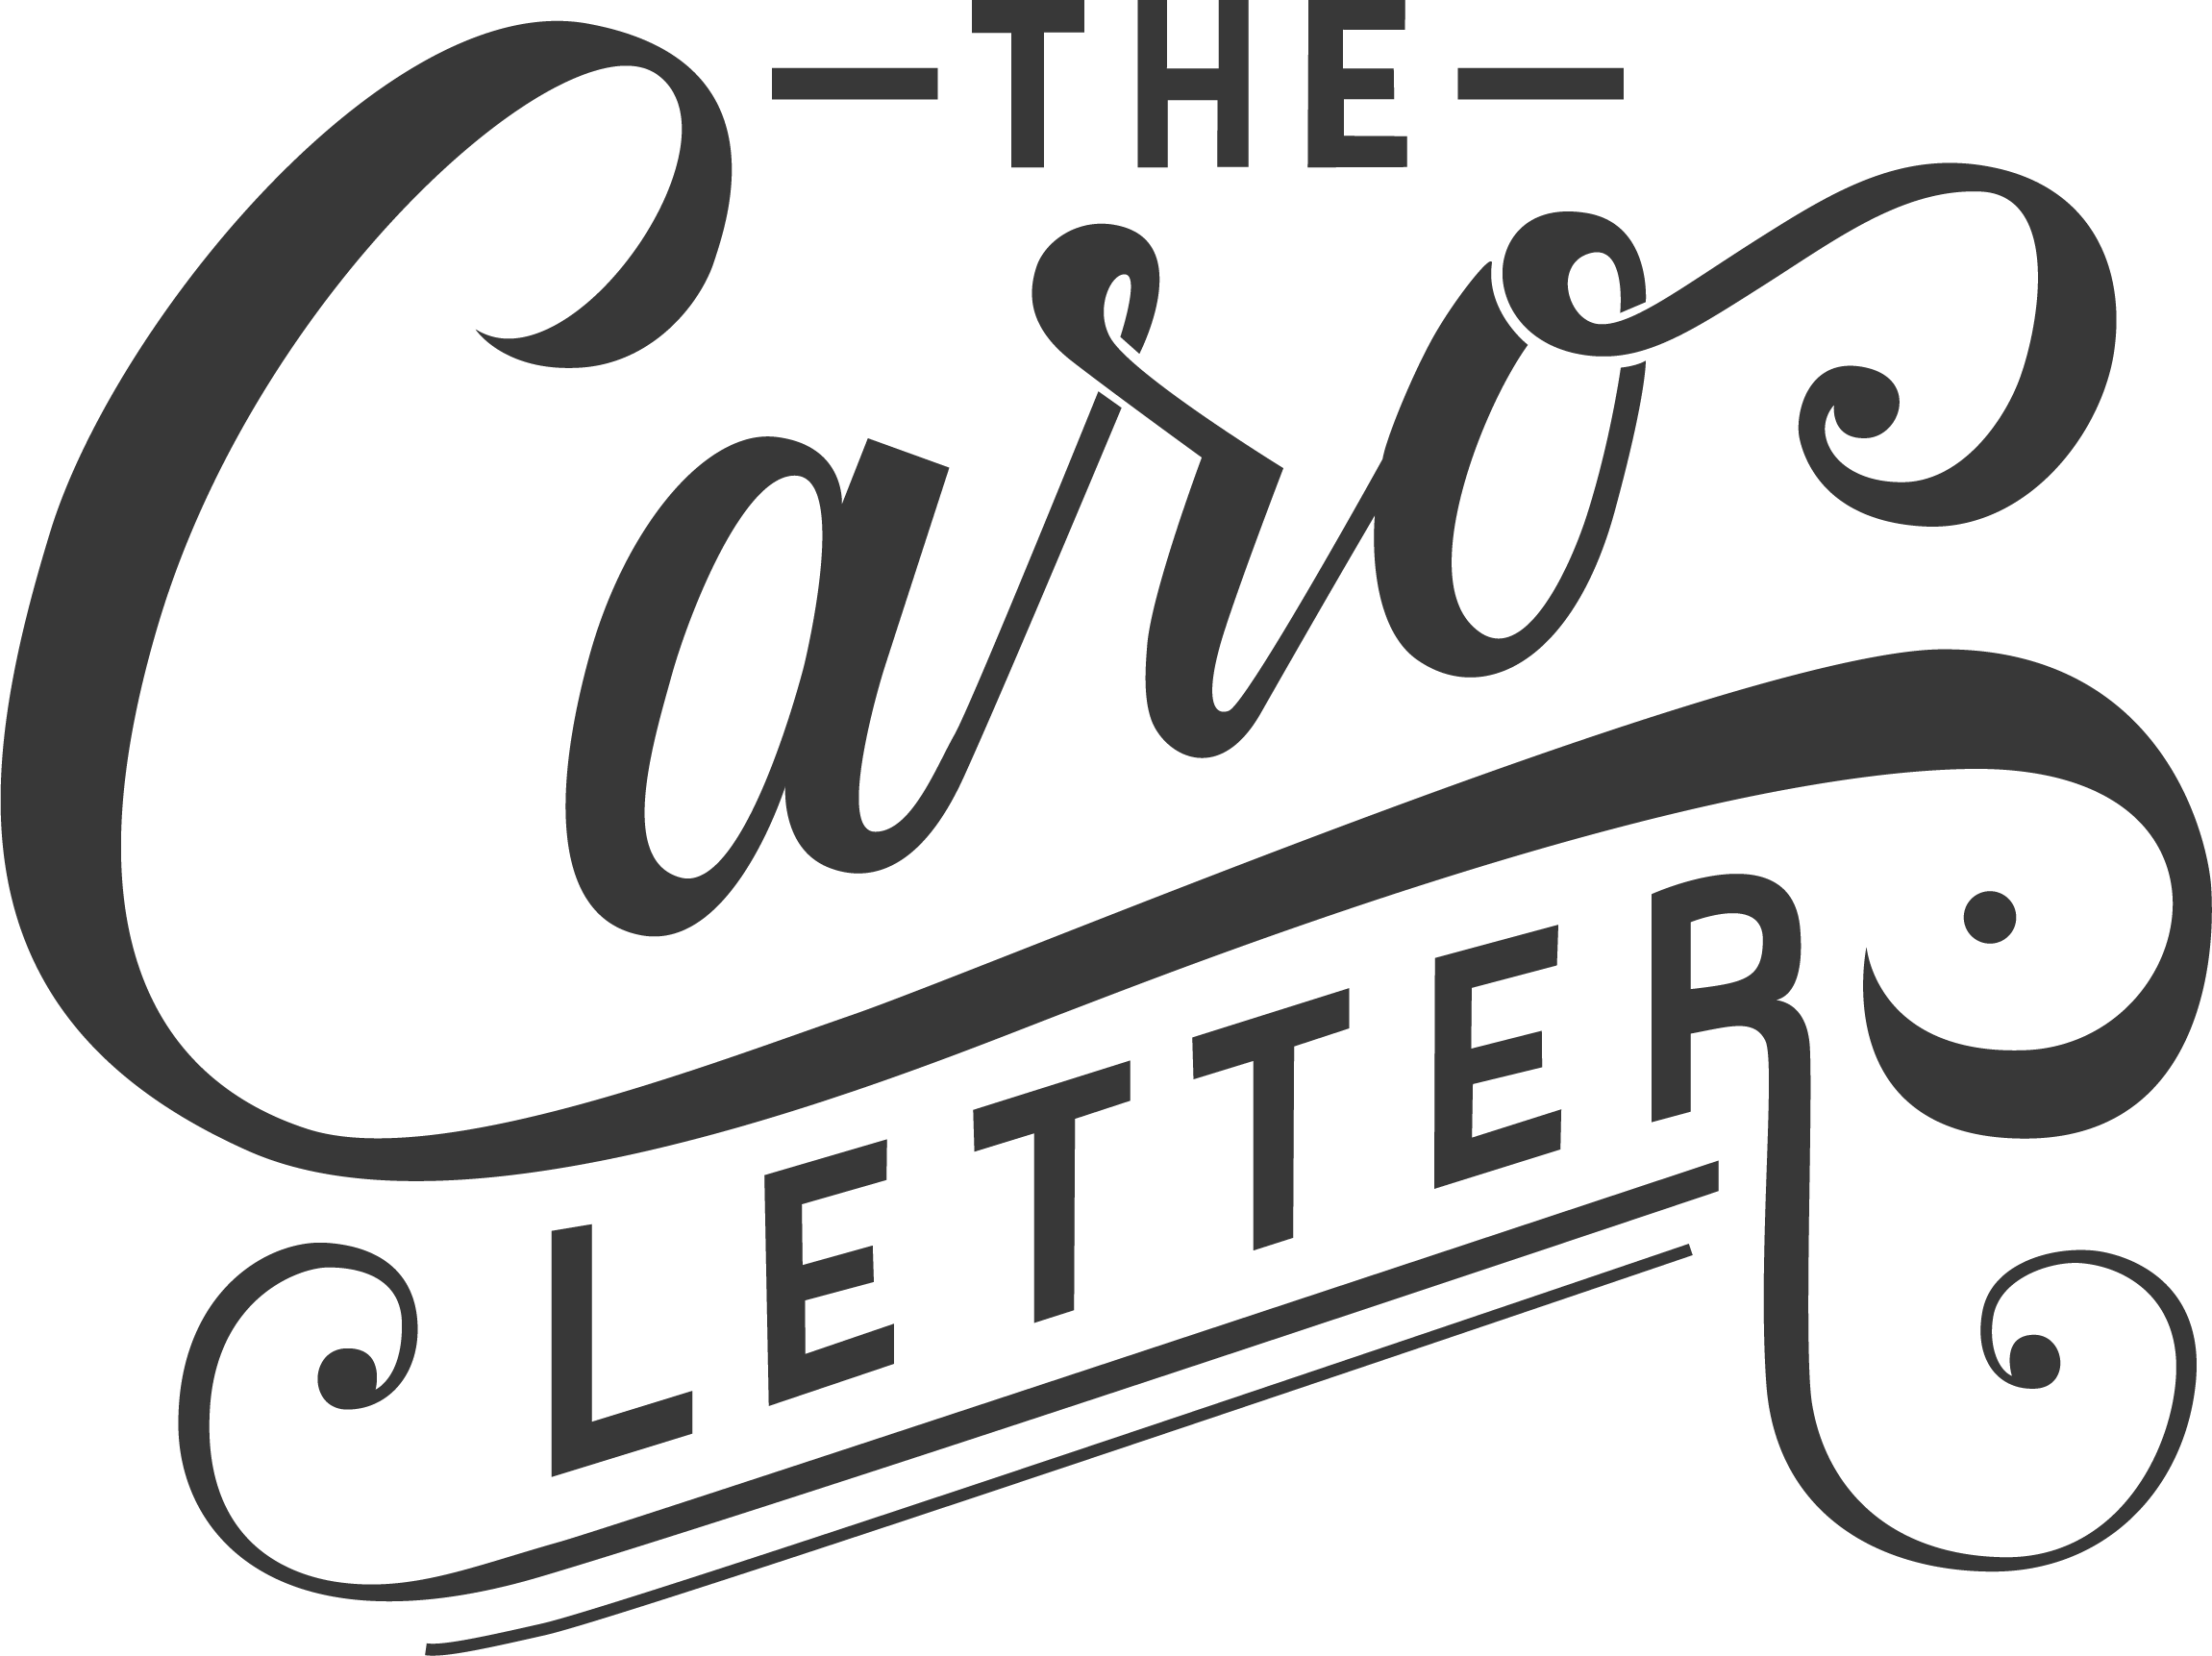 TheCaroLetter